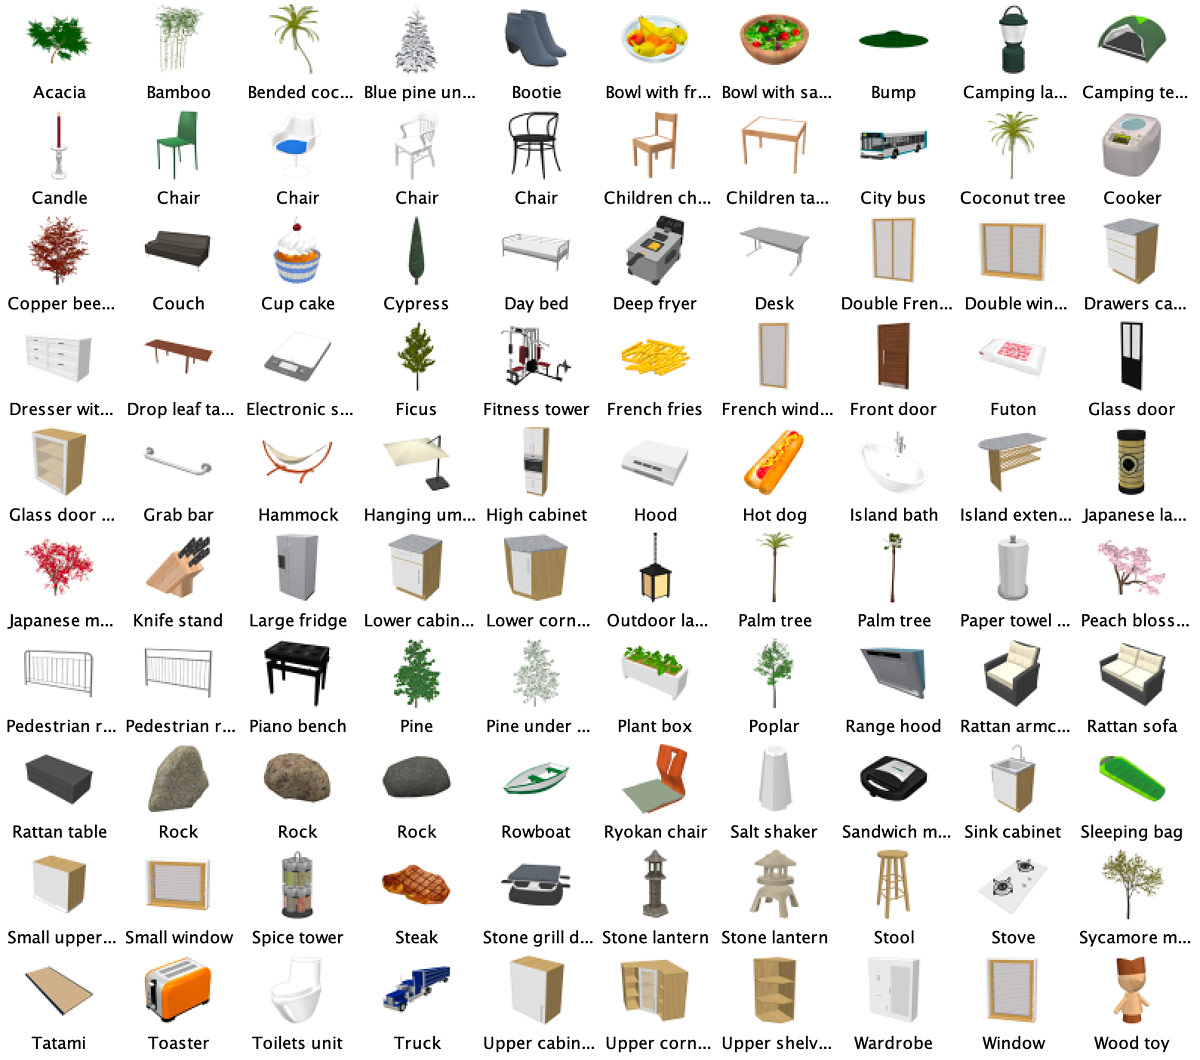 Furniture libraries 1.8 - Sweet Home 3D Blog